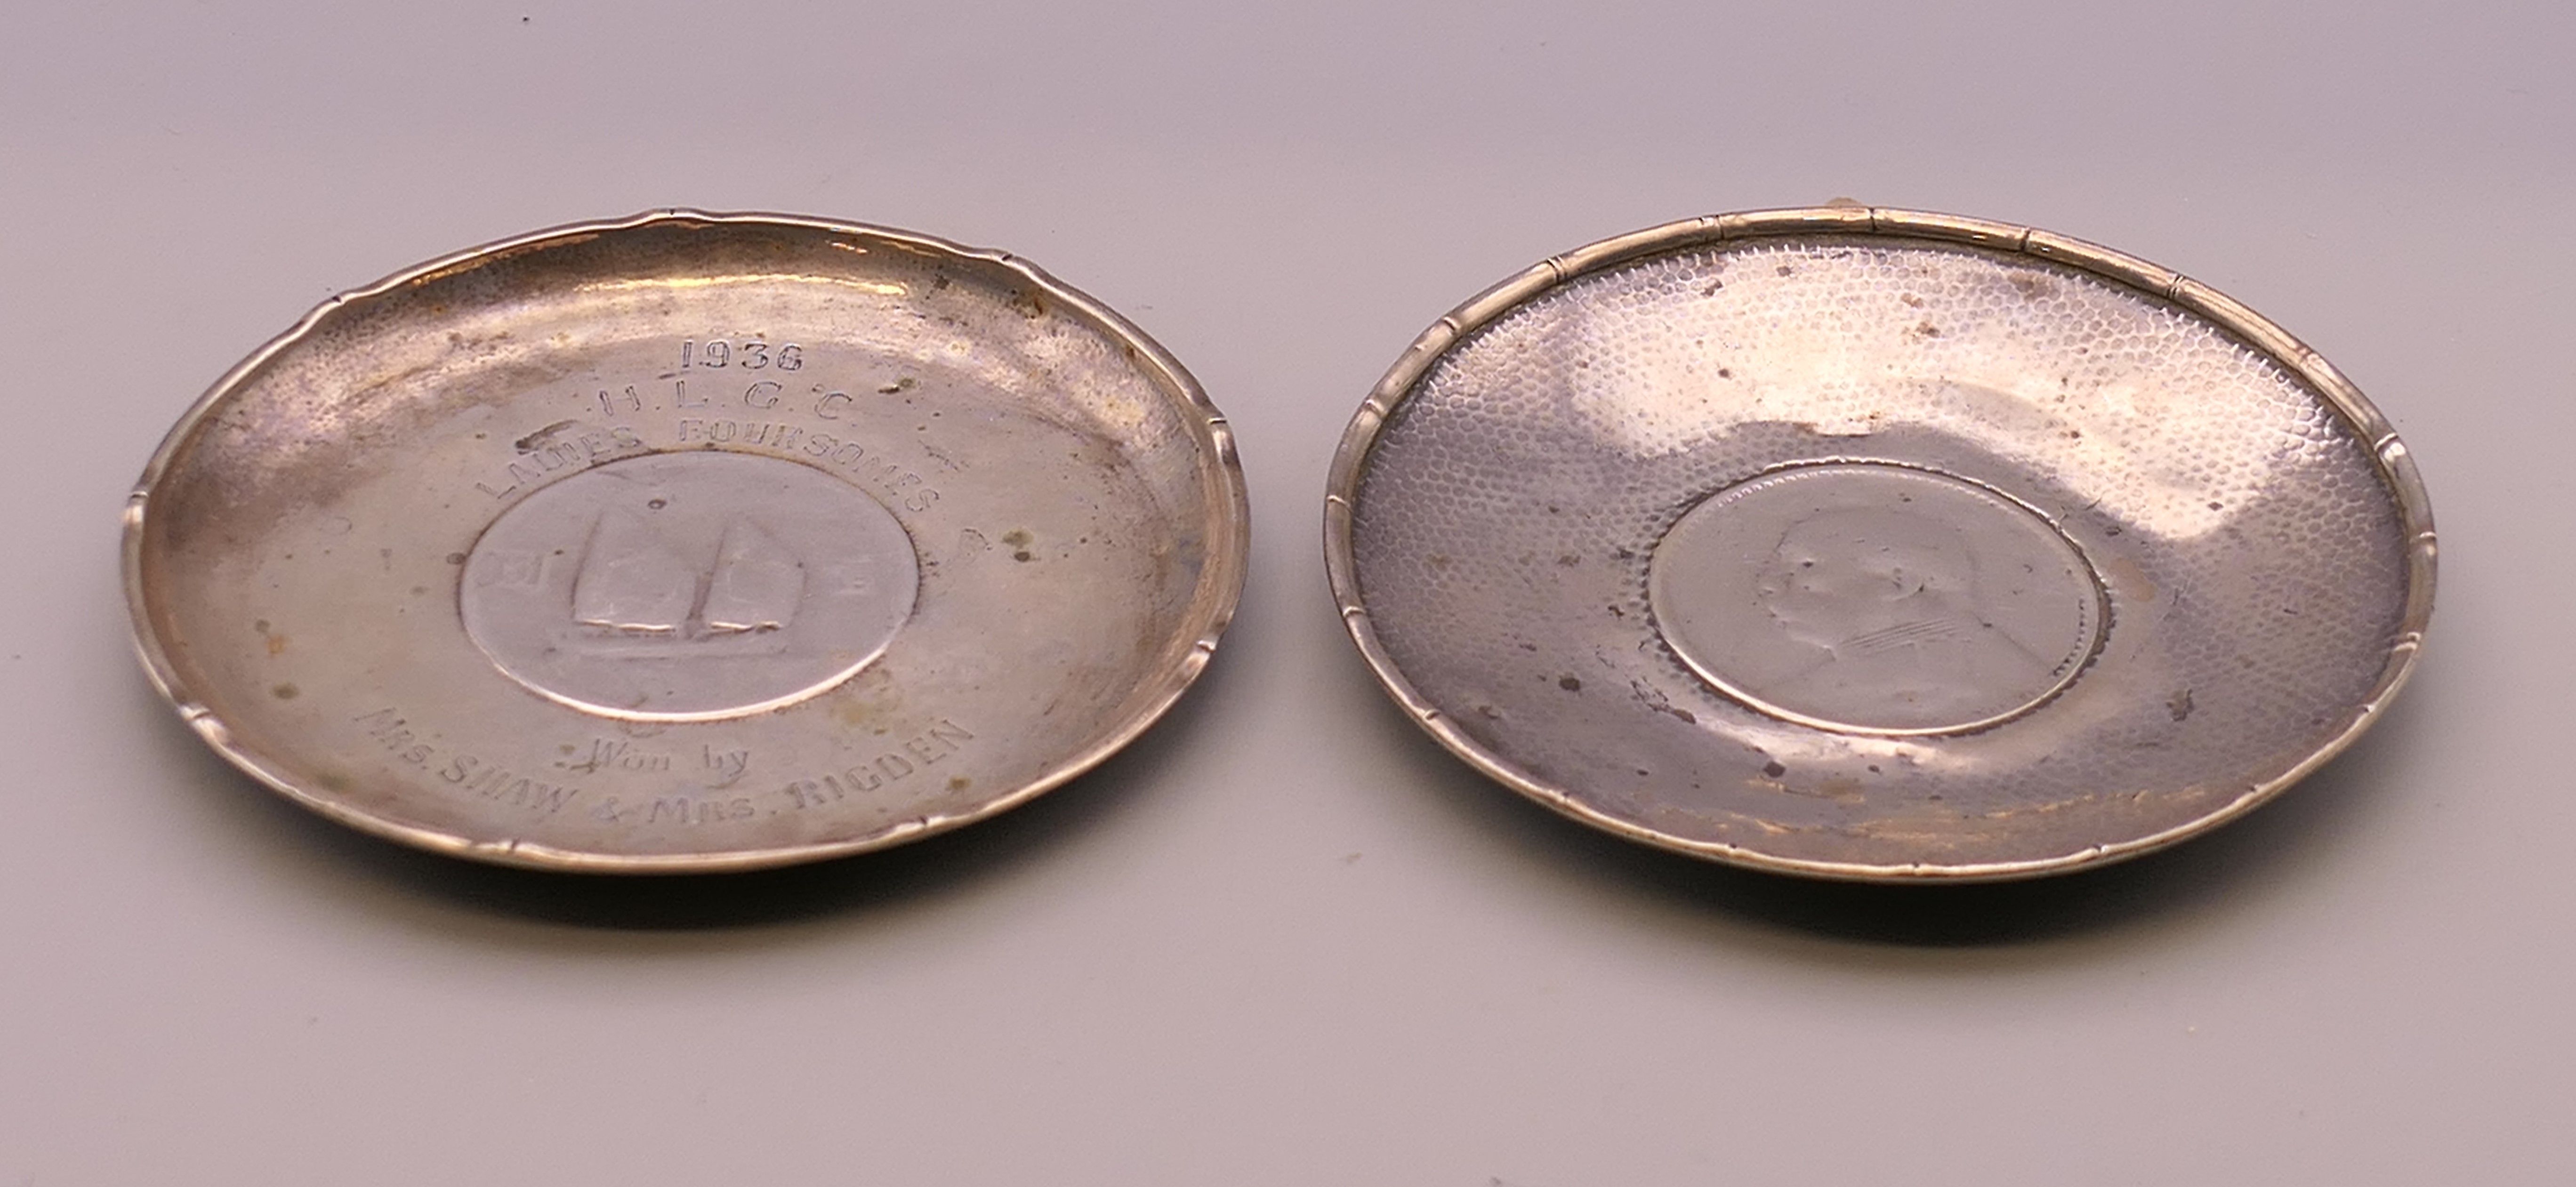 Two Chinese silver dishes inset with coins. 9.5 cm diameter. 117.9 grammes total weight.